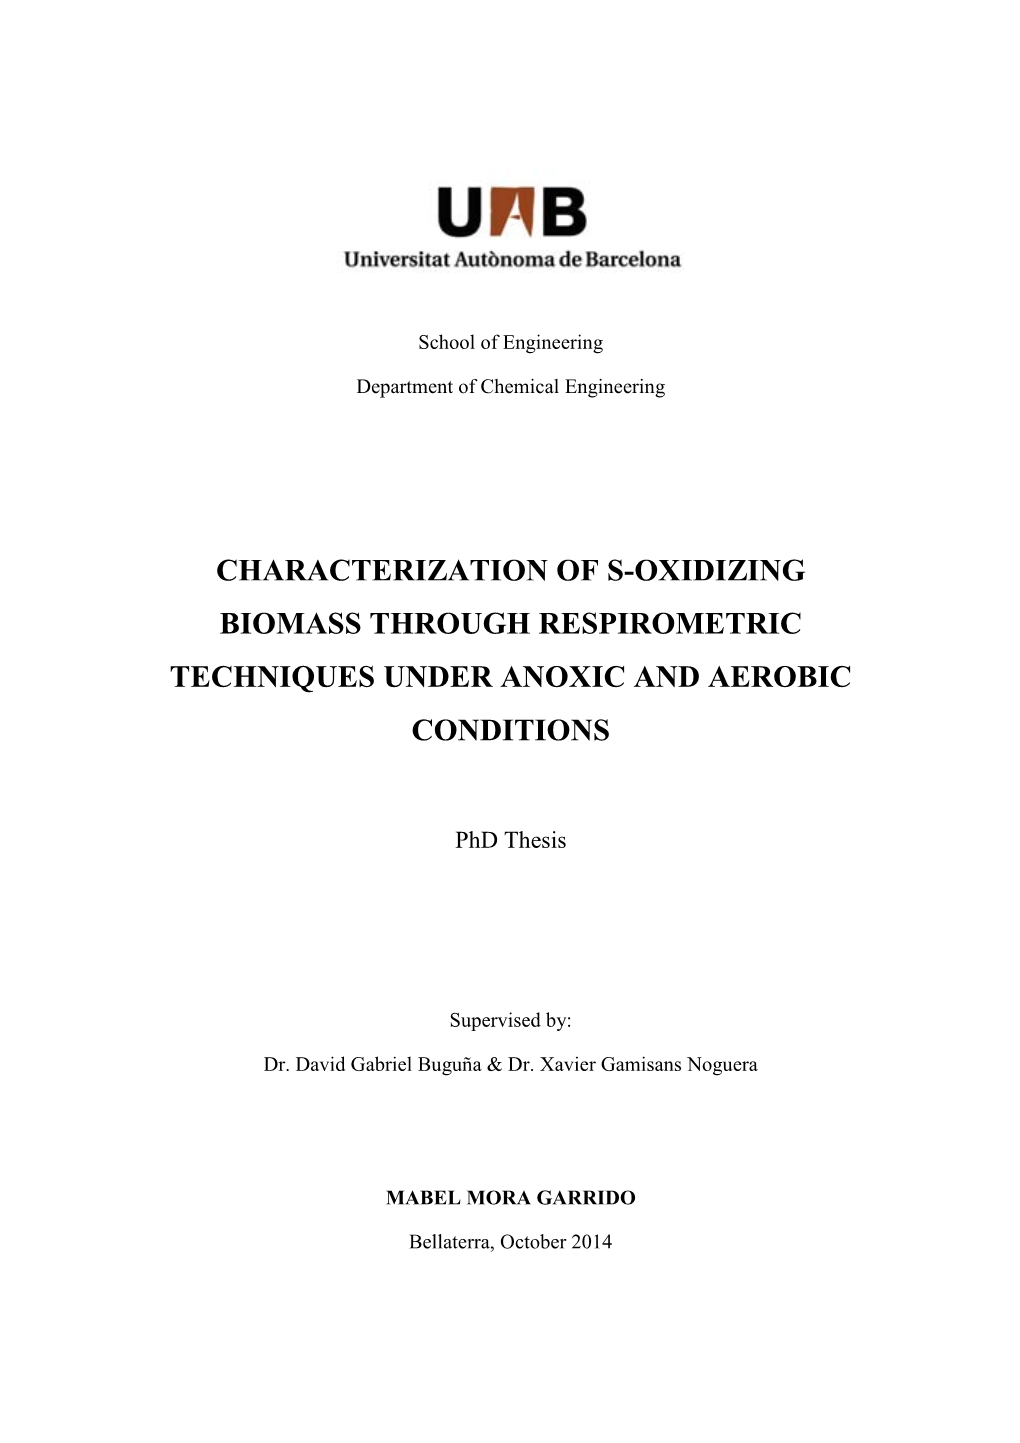 Characterization of S-Oxidizing Biomass Through Respirometric Techniques Under Anoxic and Aerobic Conditions